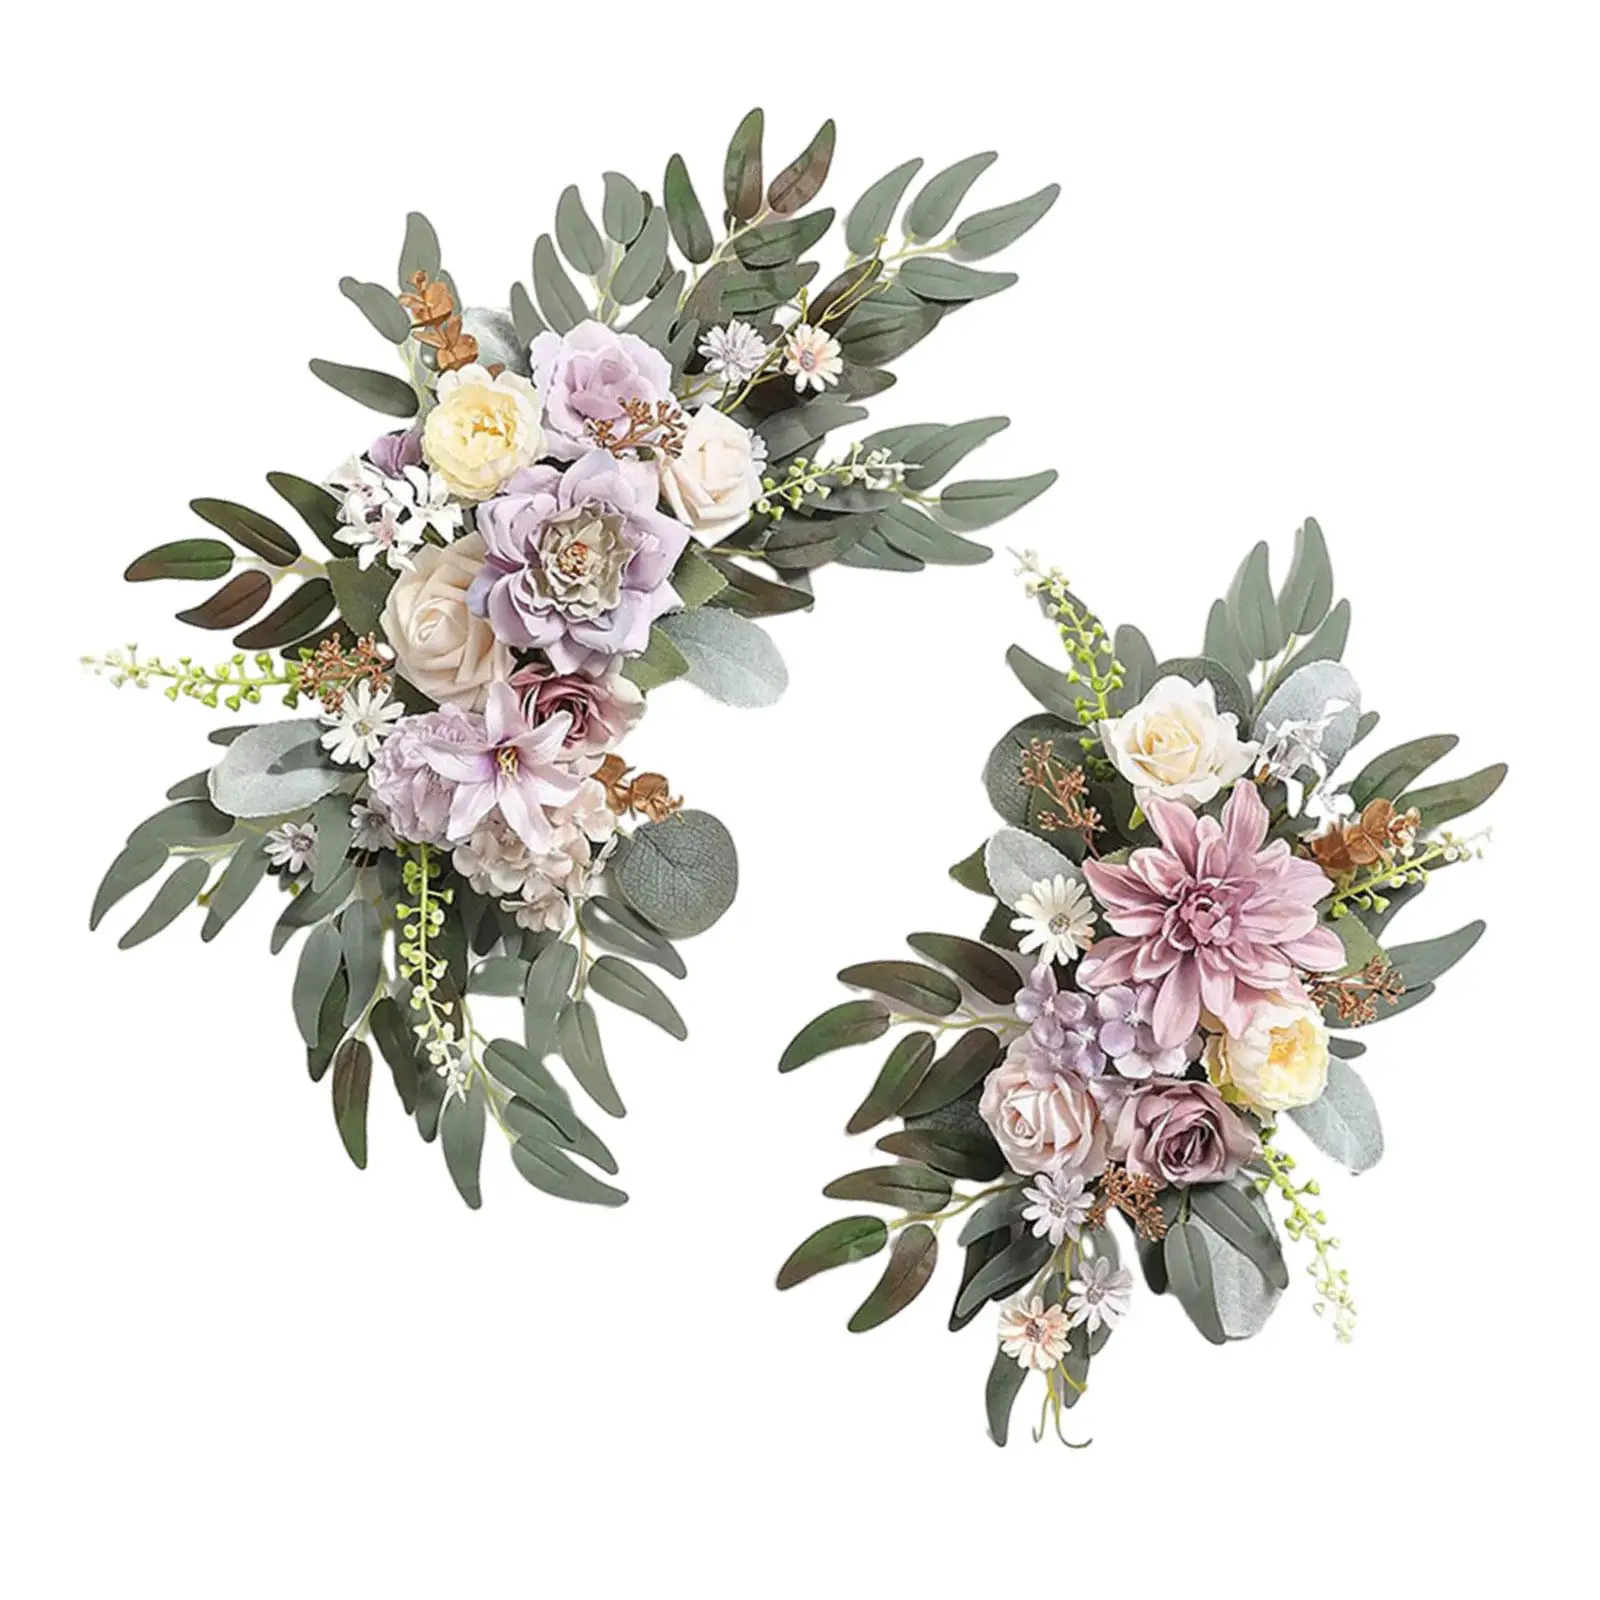 2x Wedding Arch Wreath Decorative Floral Swag Backdrop Artificial Flower Swag for Wedding Front Door Ornament Decoration Wall